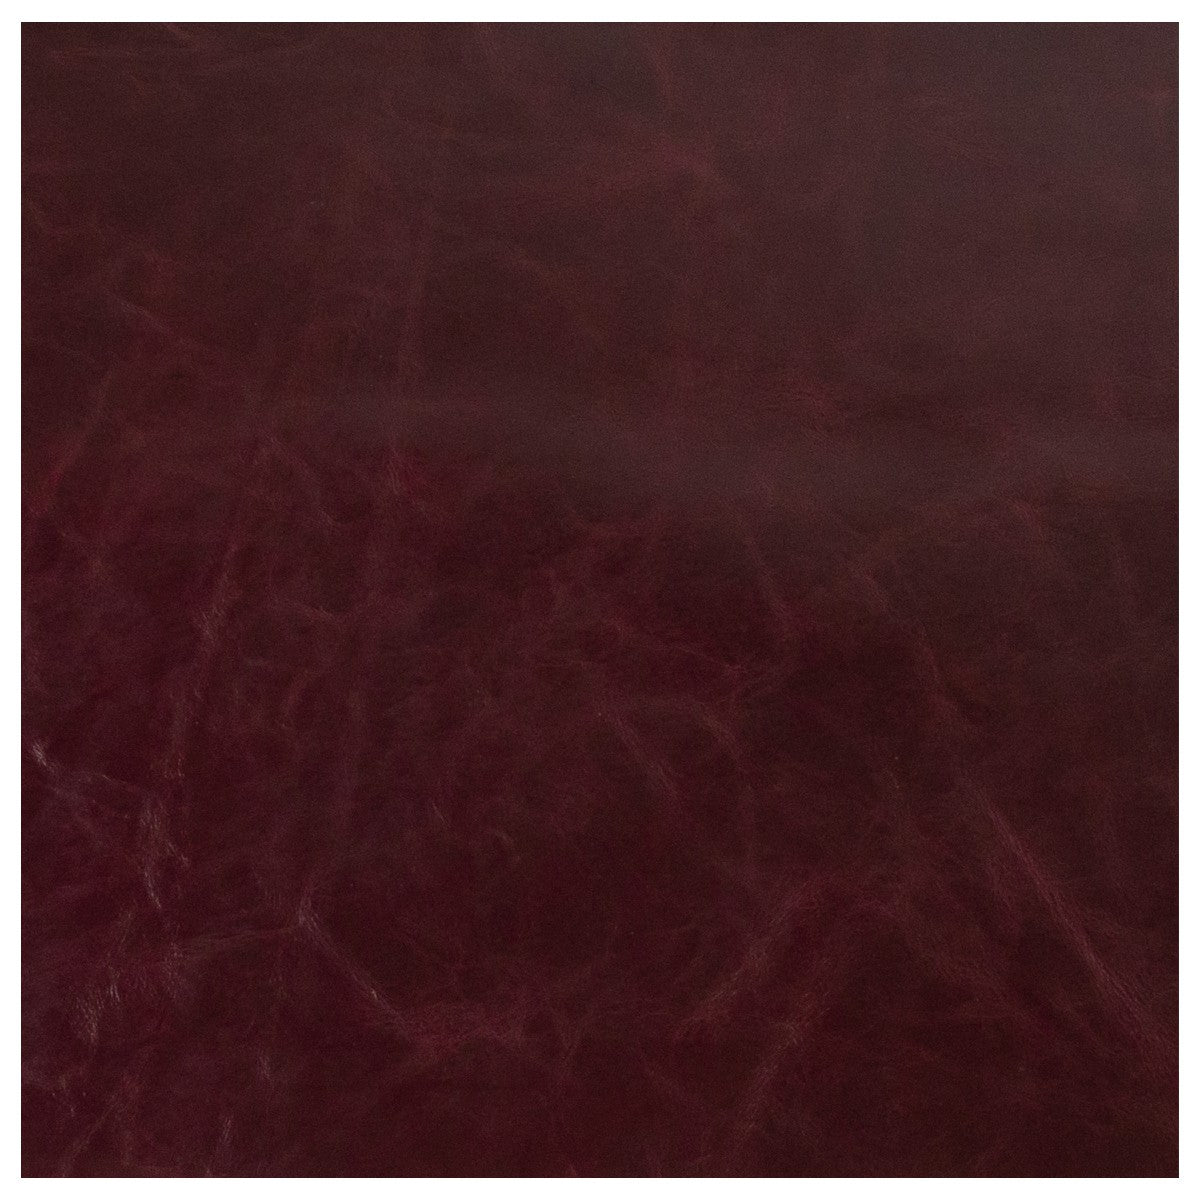 Genuine Leather Tooling and Crafting Sheets | Heavy Duty Full Grain Cowhide (1.1-1.3mm) | Navaro Burgundy - FabricLA.com